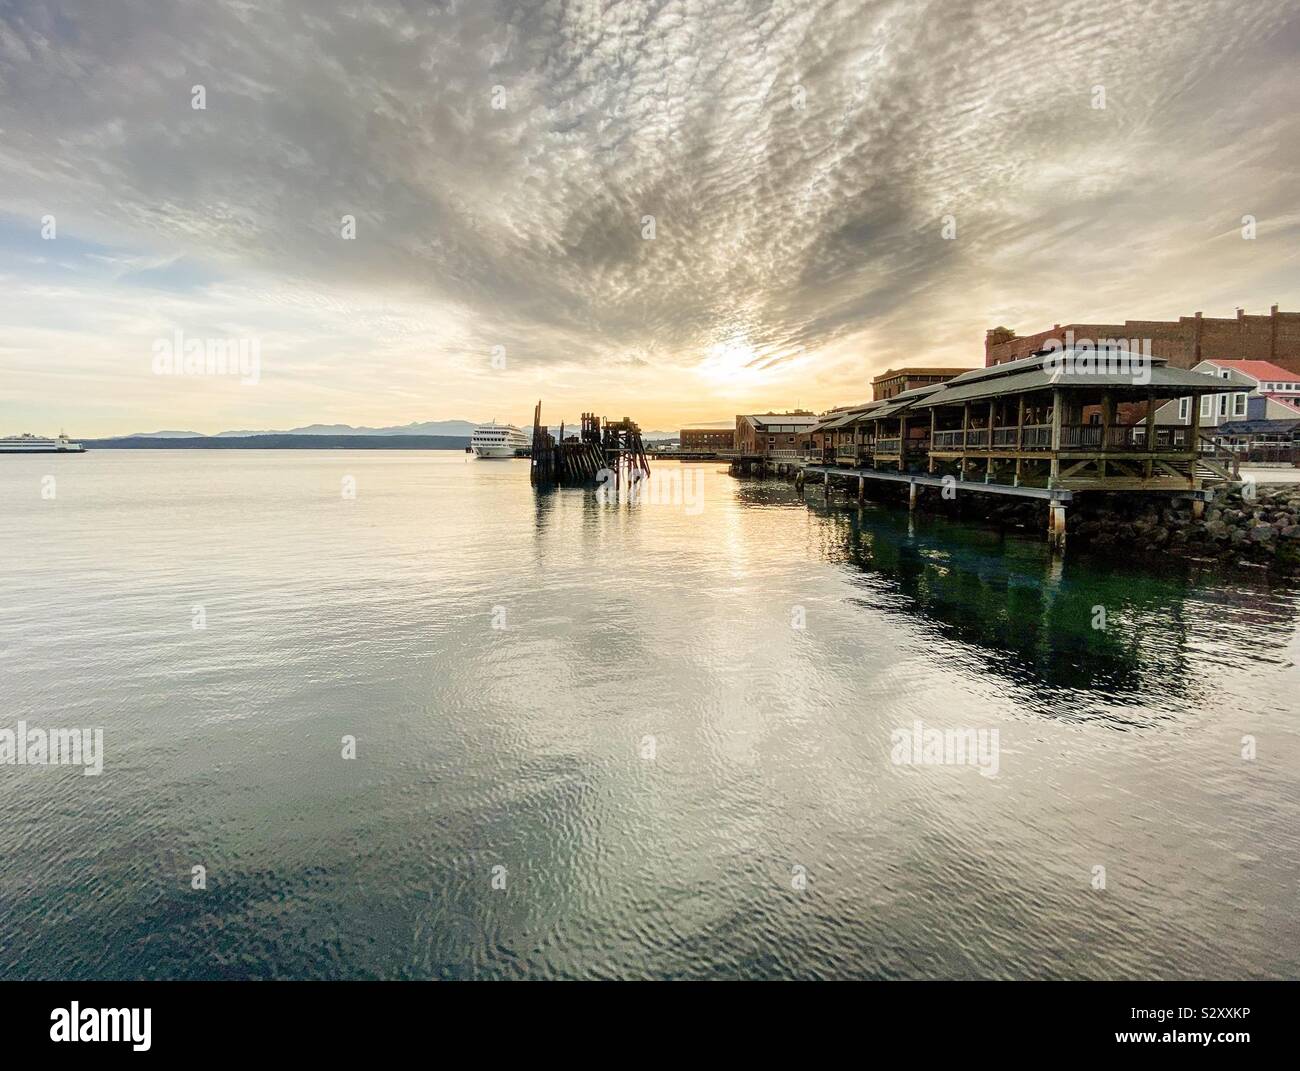 Port Townsend waterfront at the historic old town. Washington state, USA Stock Photo